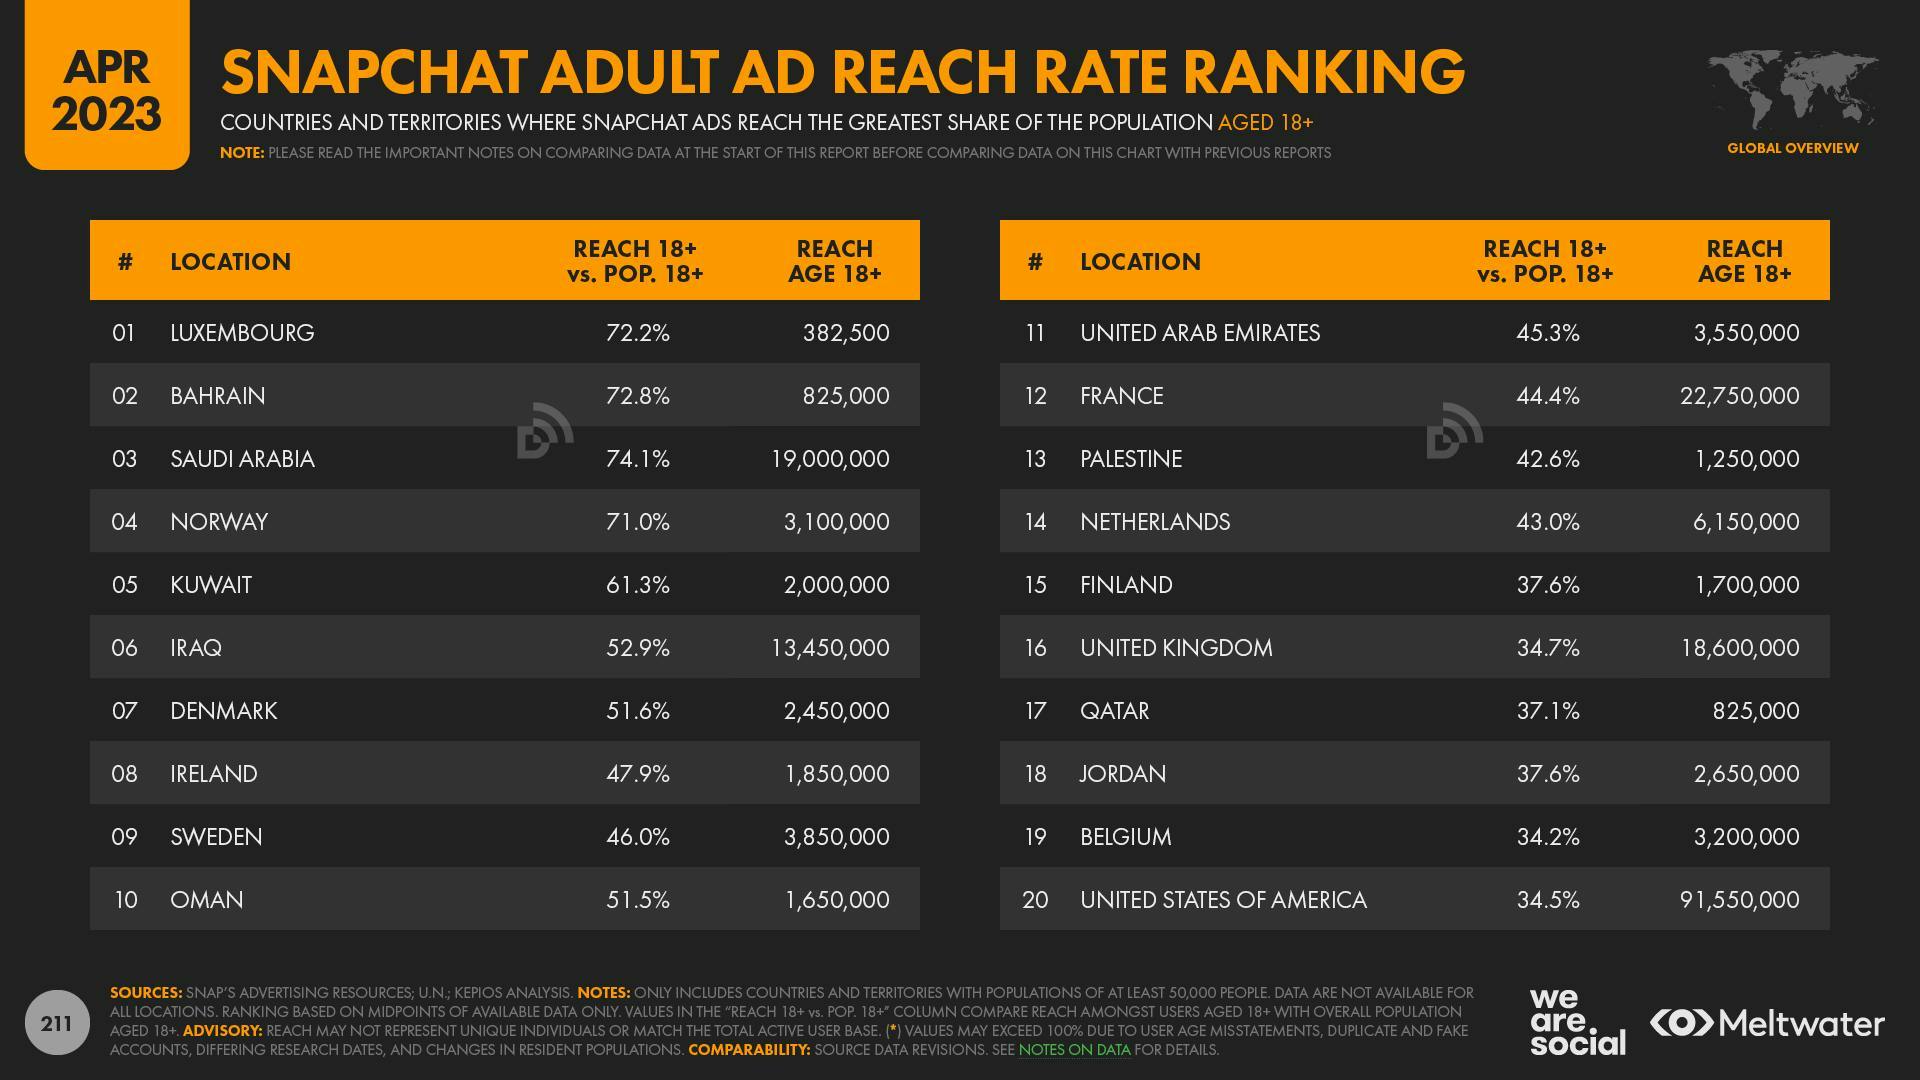 April 2023 Global State of Digital Report: Snapchat Adult Ad Reach Rate Ranking